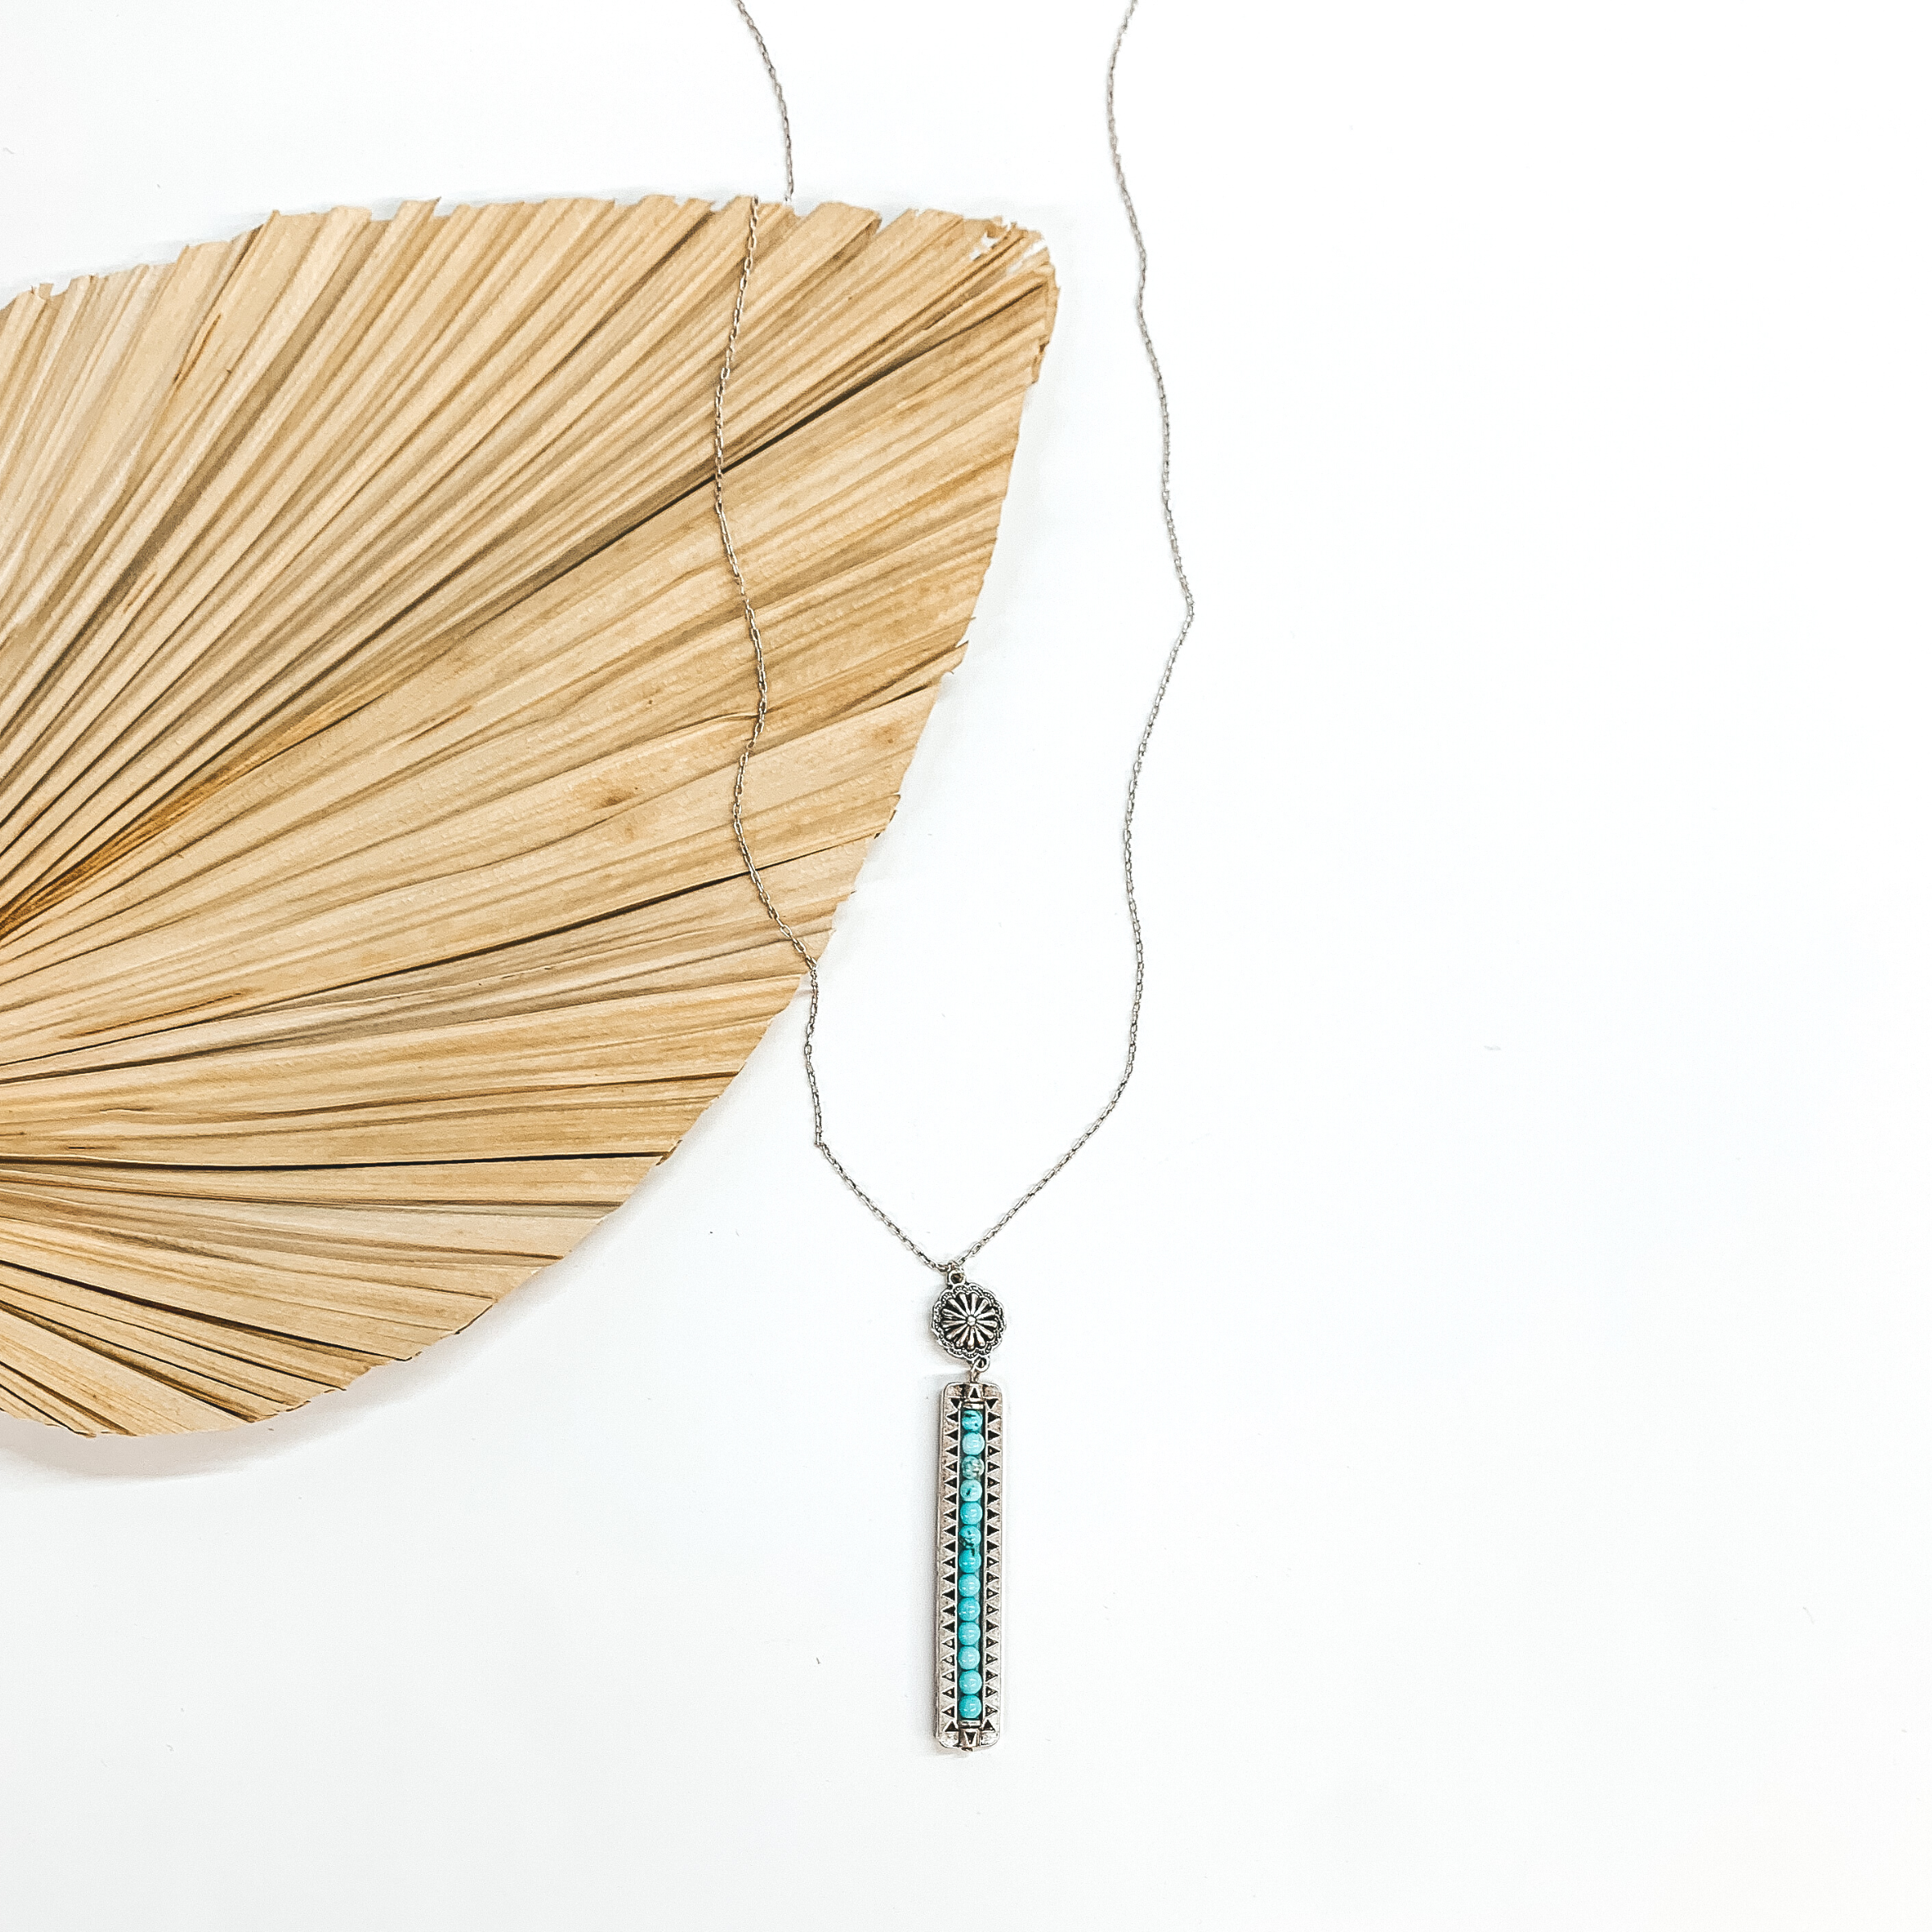 Long silver necklace with a concho and rectangle bar pendant. The  bar pendant has stone beads in turquoise and it has black details around.  This necklace is taken on a dried up palm leaf and a white background.